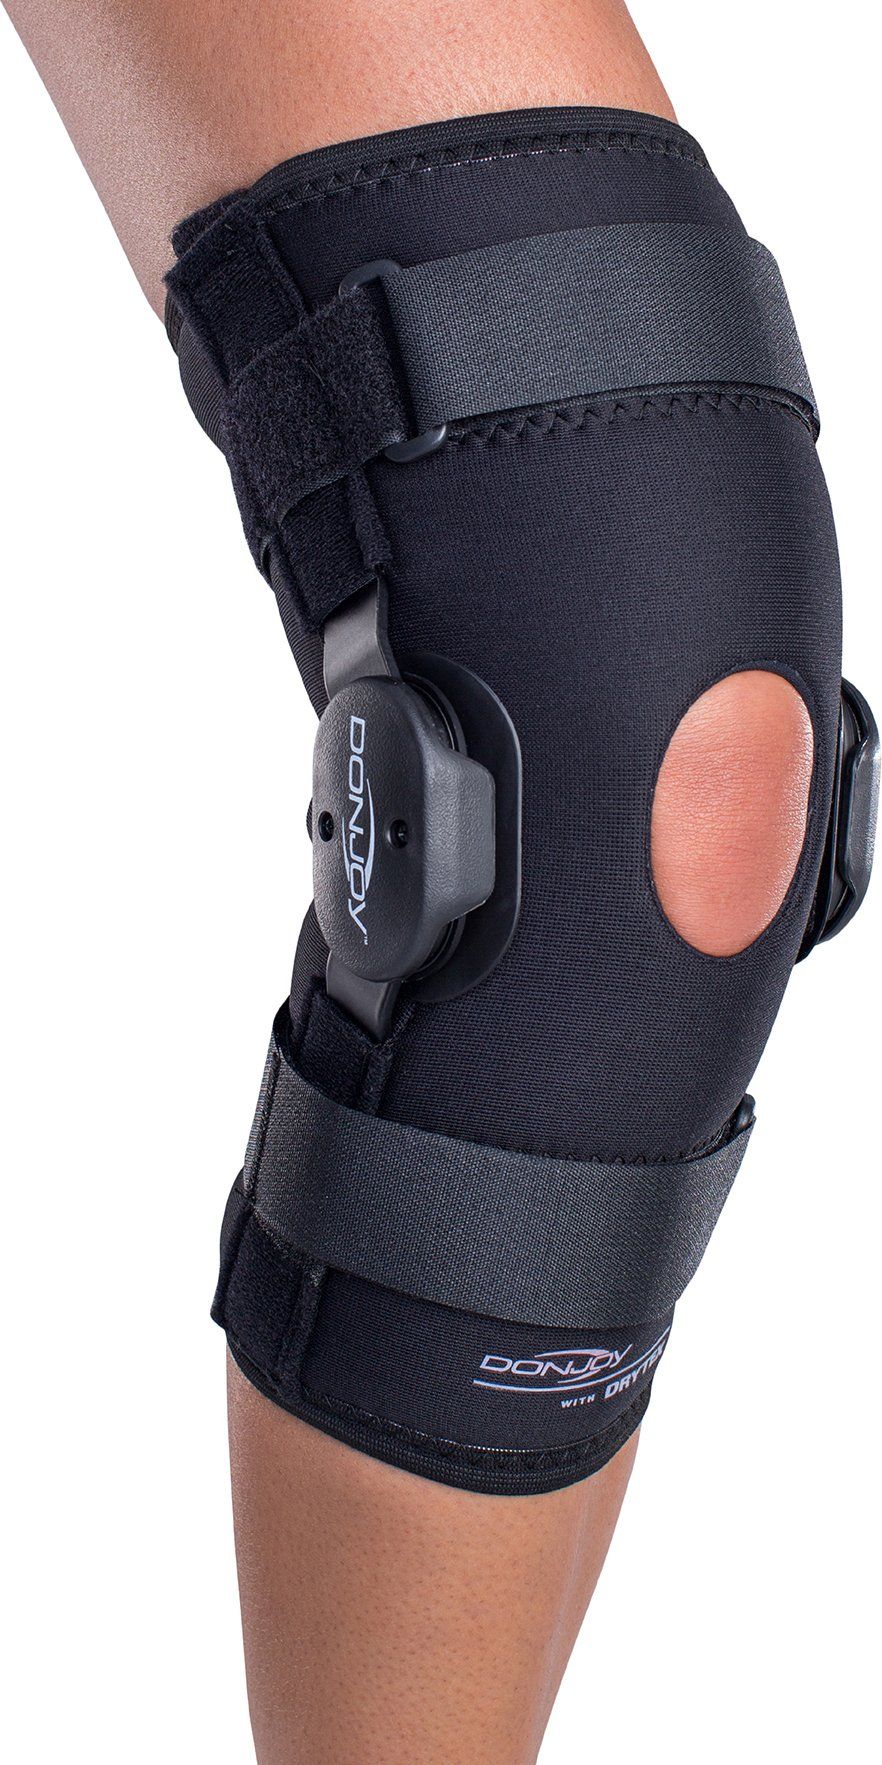 These Knee Braces Help With Arthritis Pain, Swelling, and Post-Surgery ...